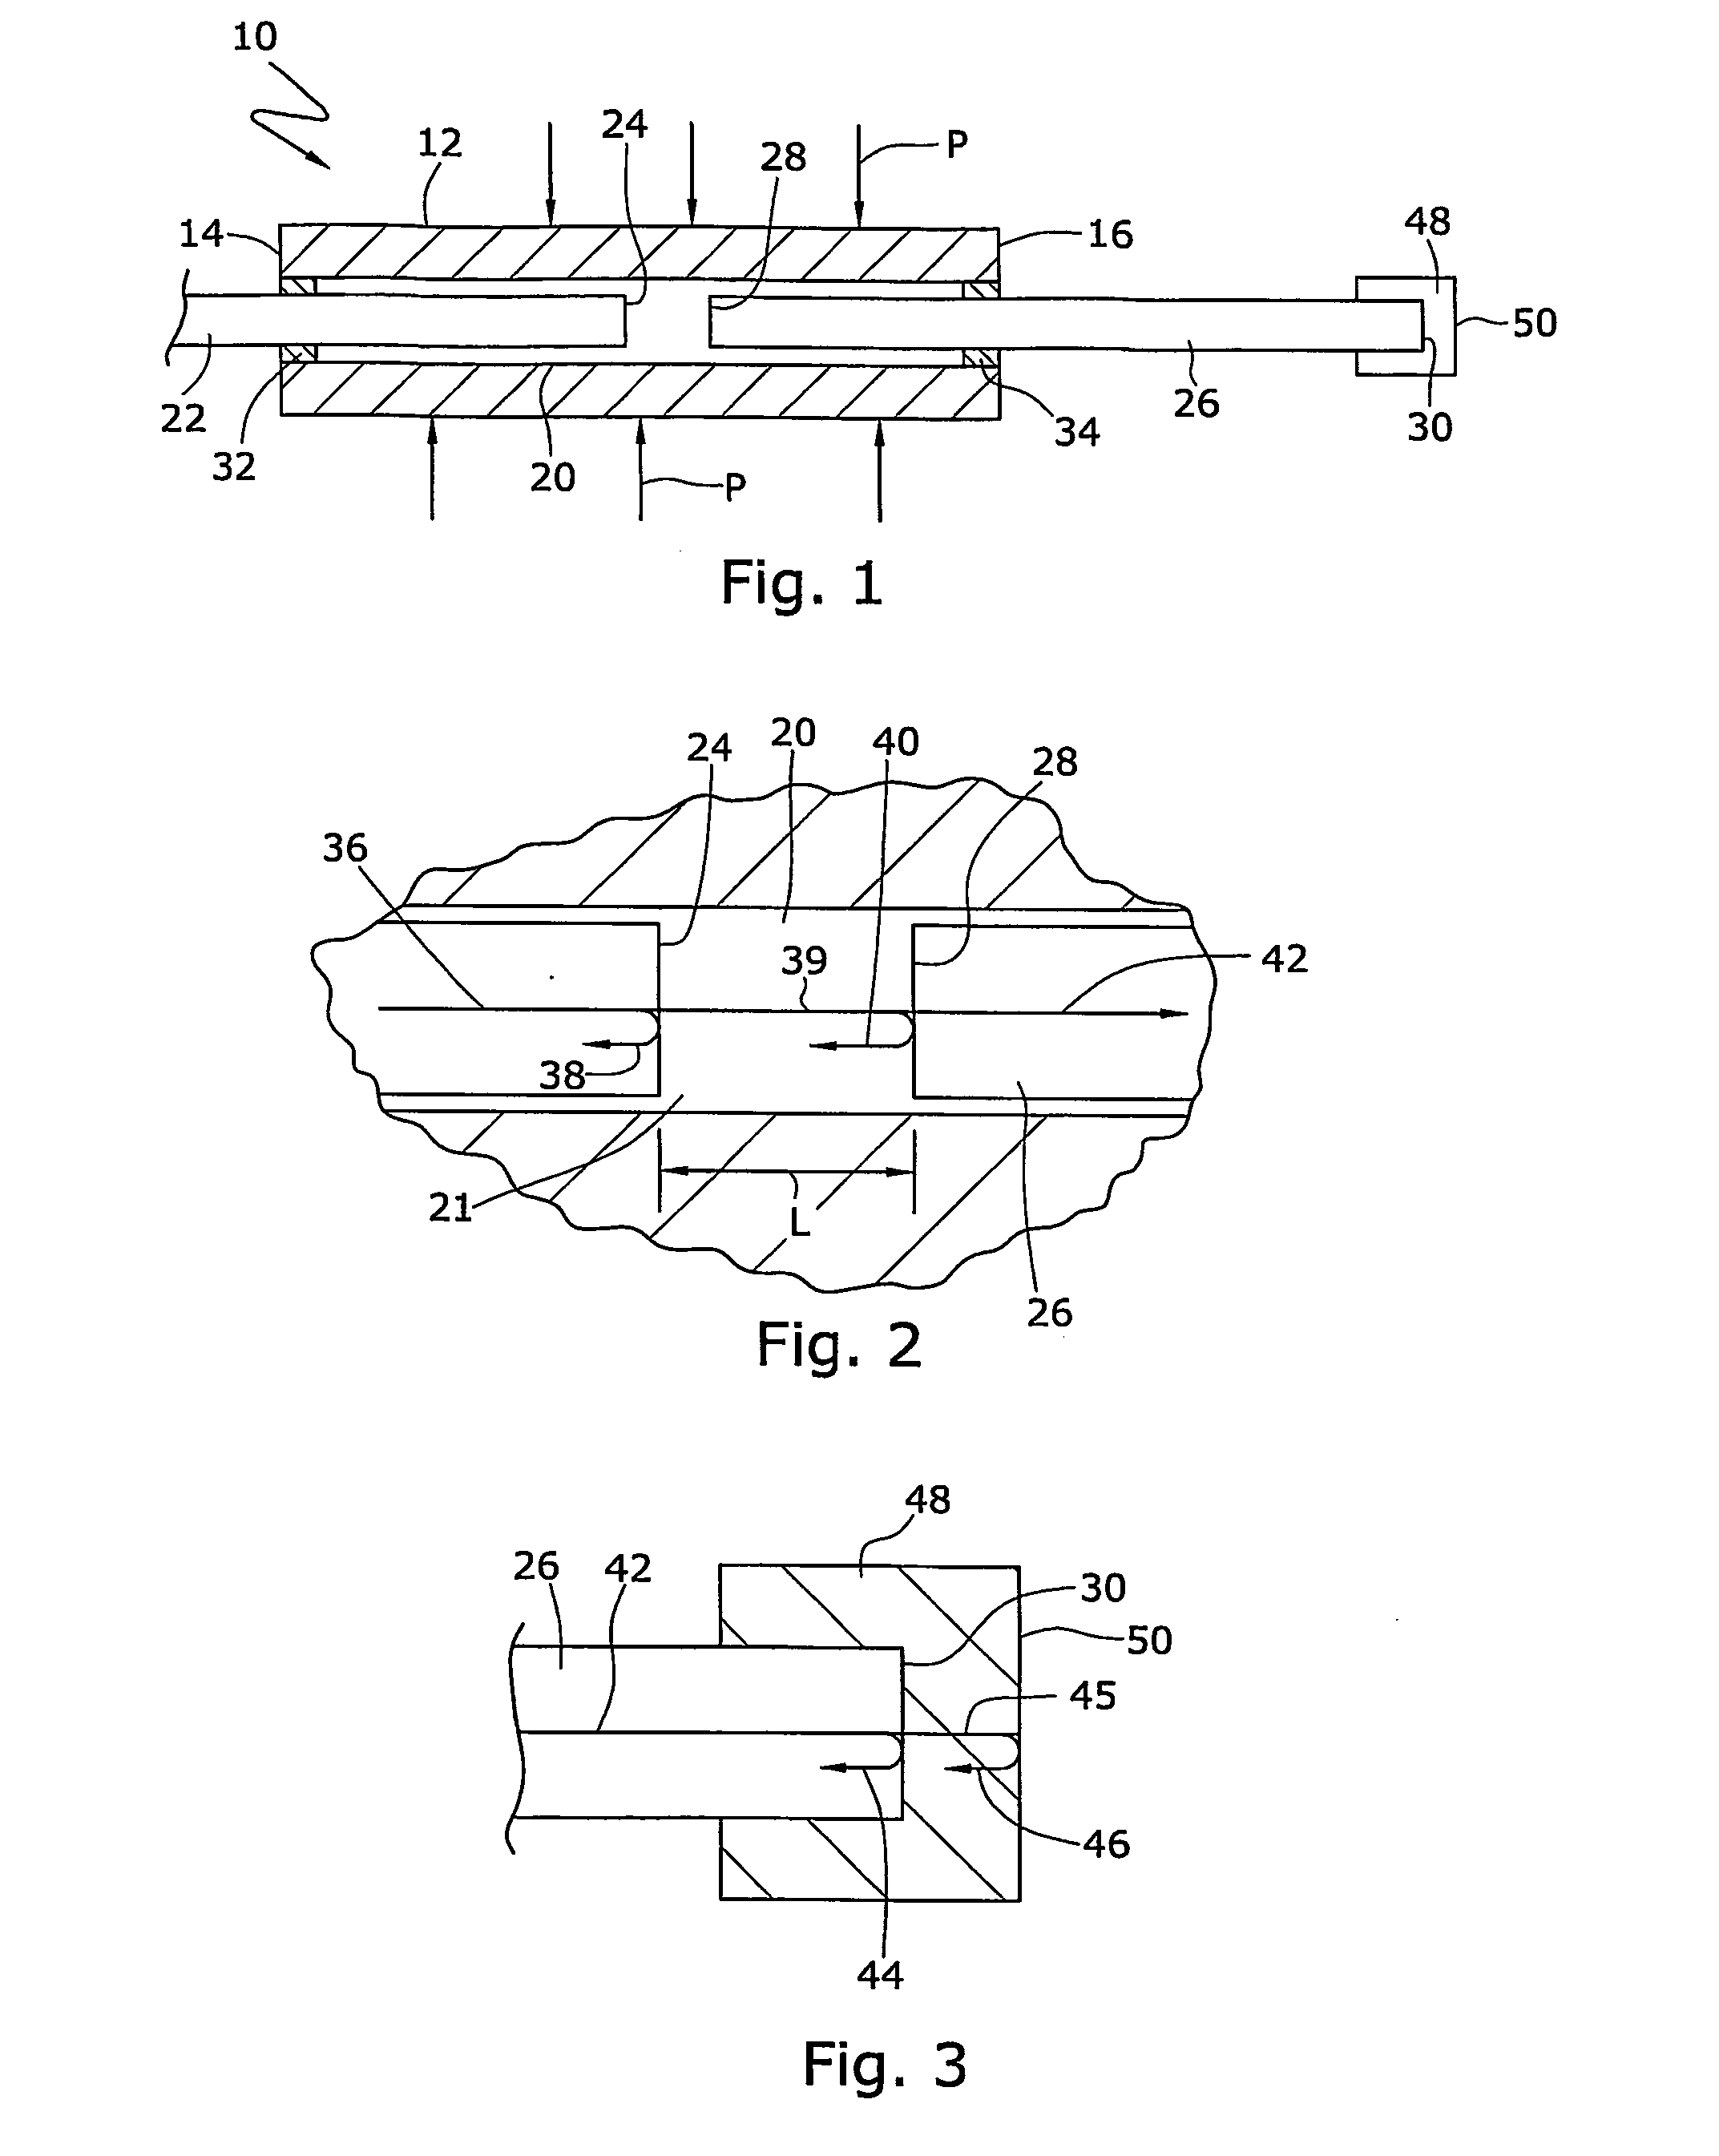 Optical sensor with co-located pressure and temperature sensors